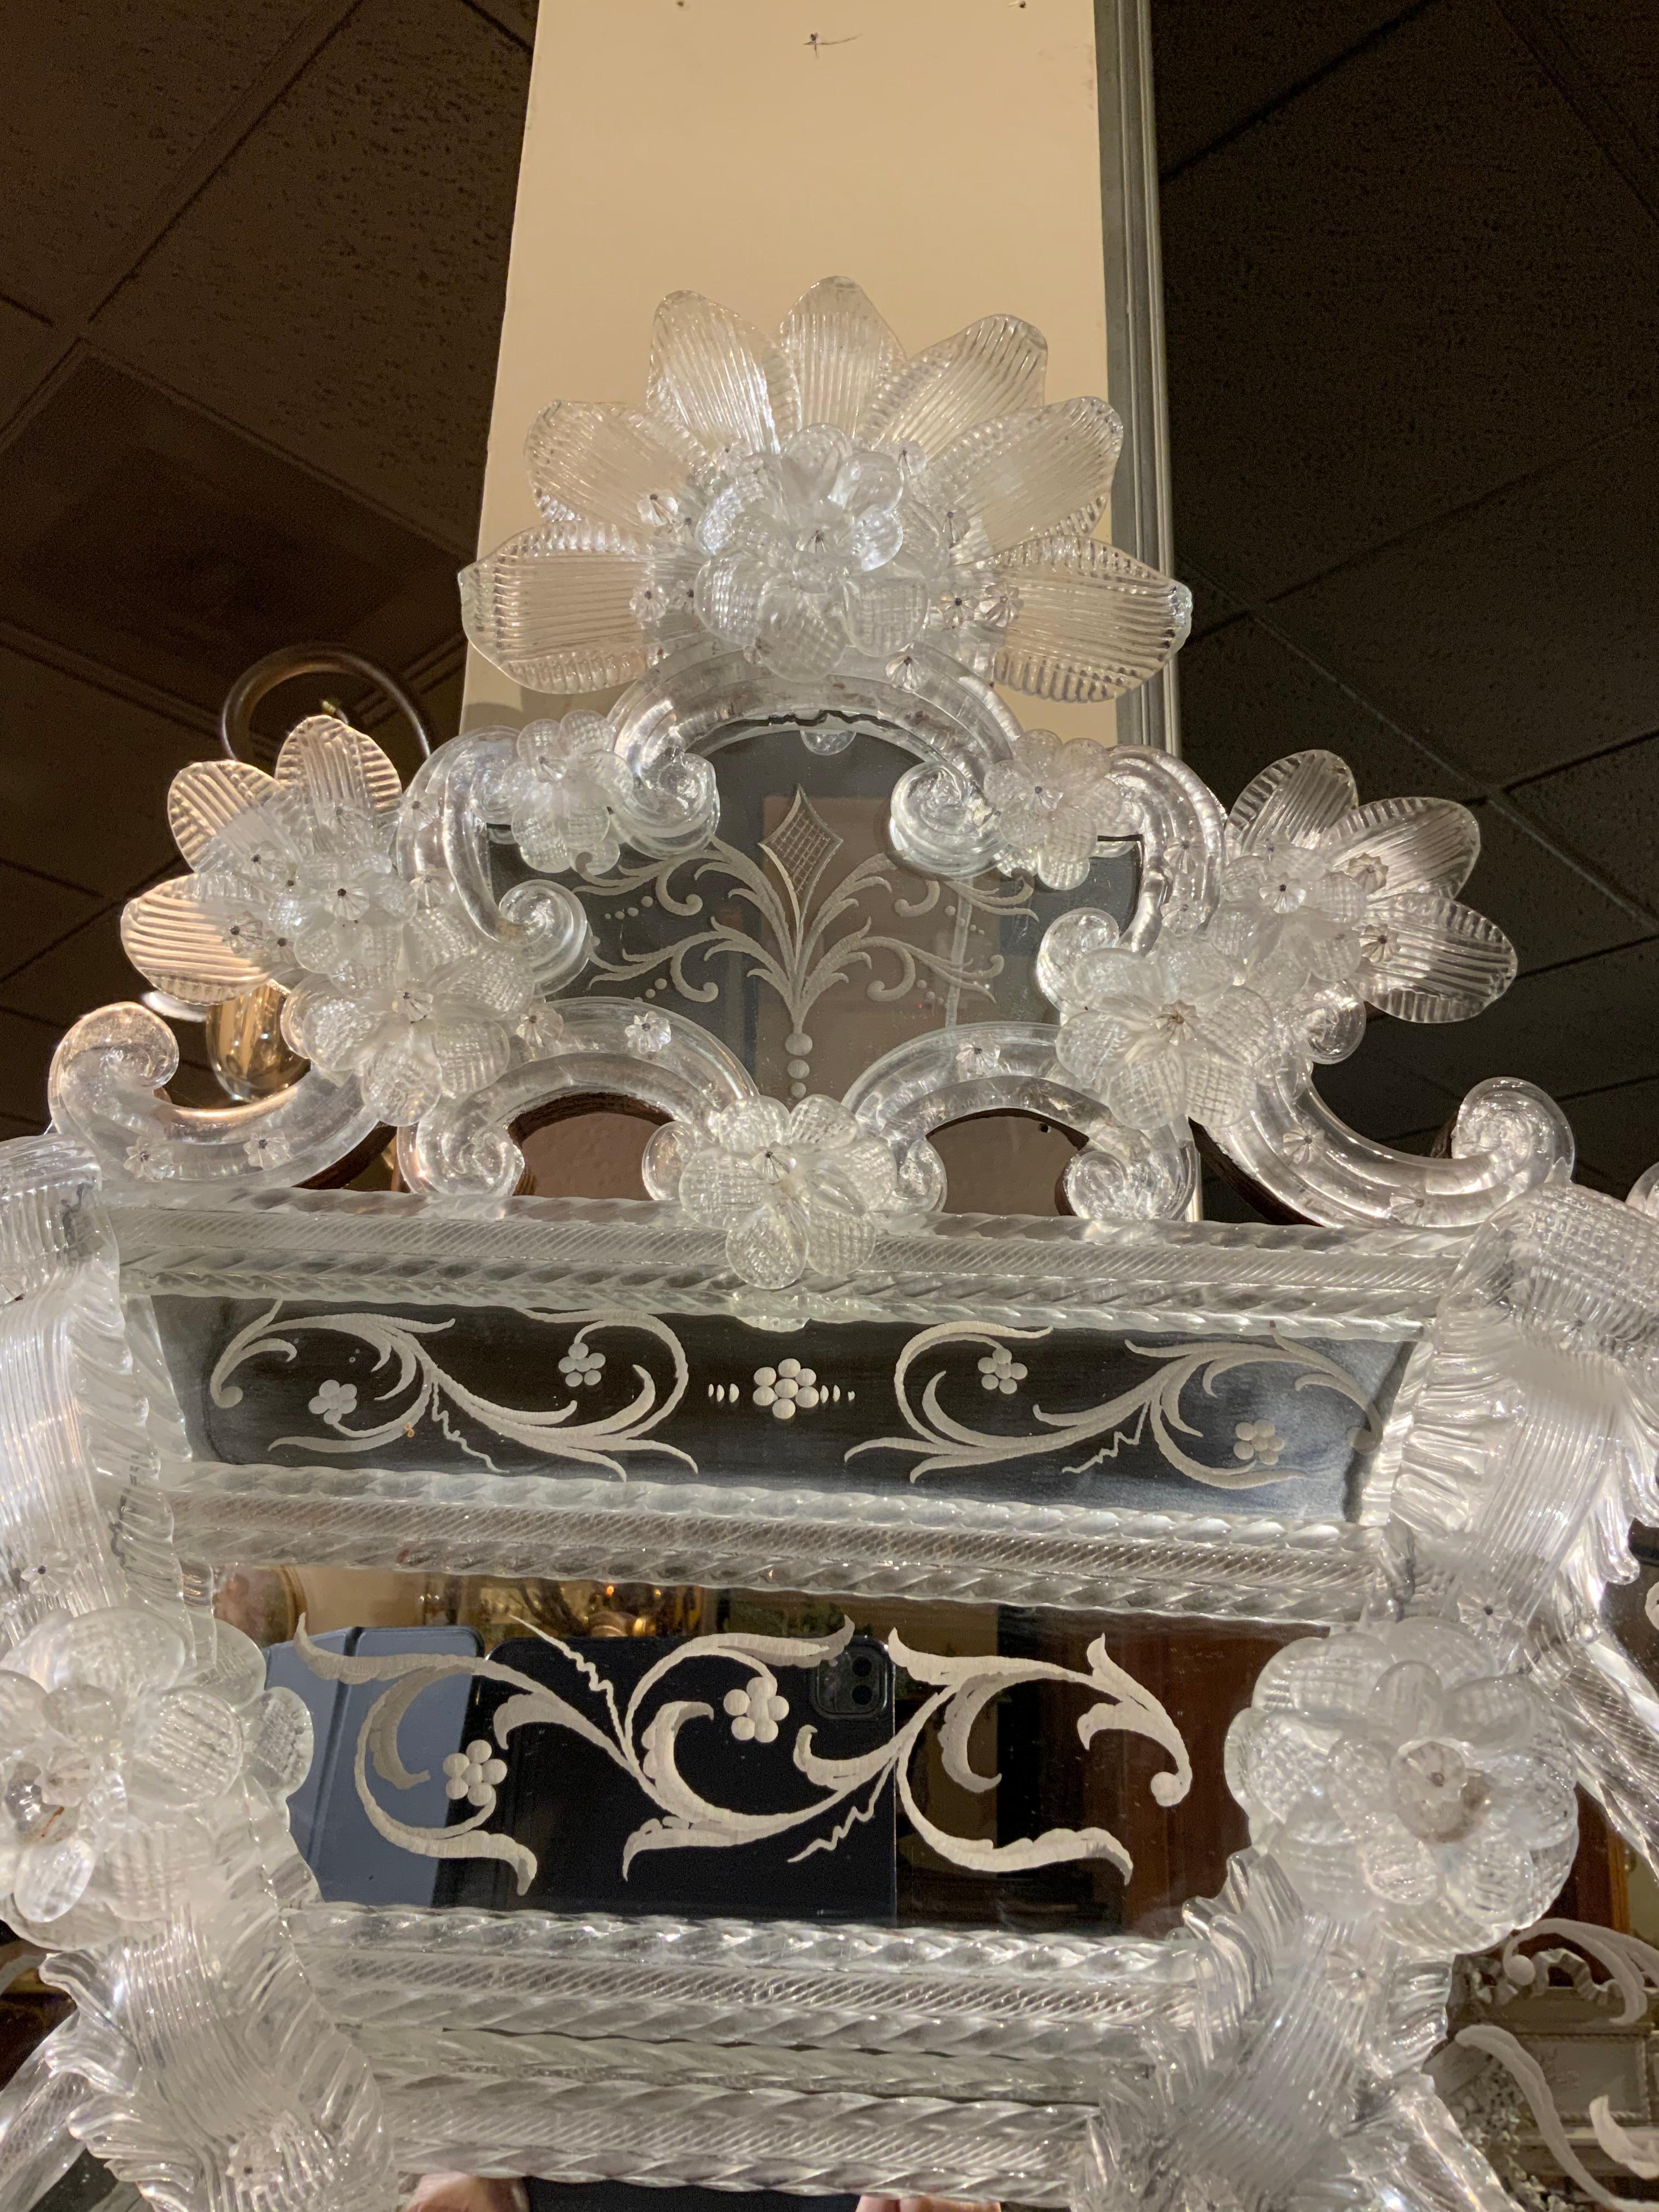 Large Venetian Wall Mirror with Ornate Etchings and Floral Decorations In Excellent Condition For Sale In Houston, TX